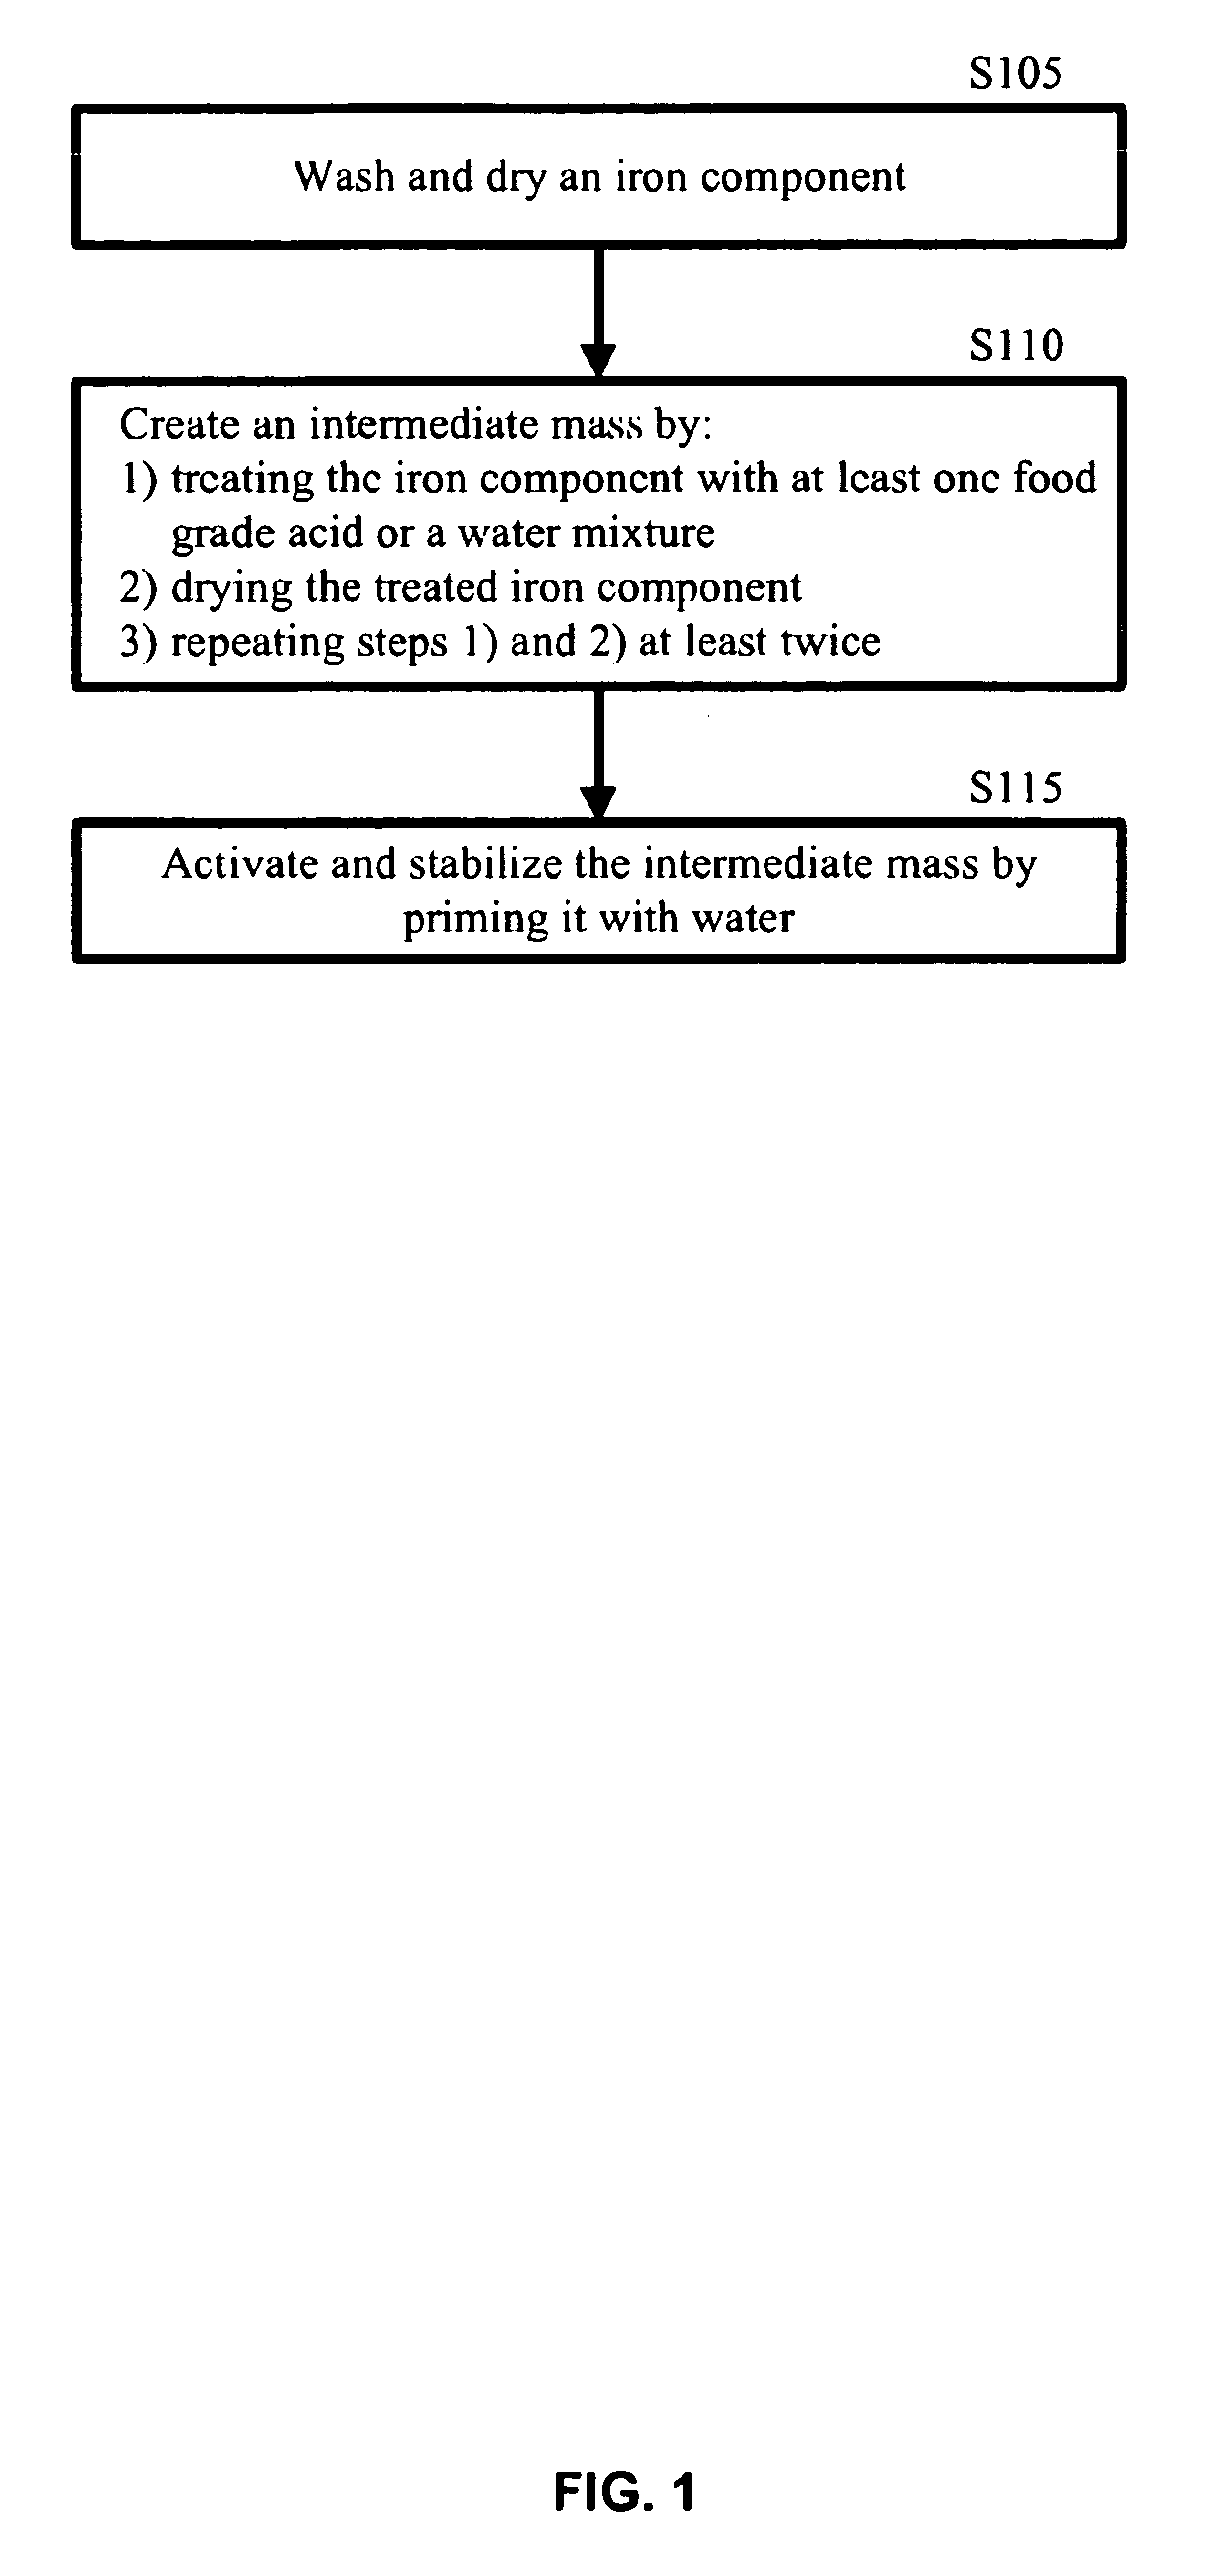 Iron composition based water filtration system for the removal of chemical species containing arsenic and other metal cations and anions